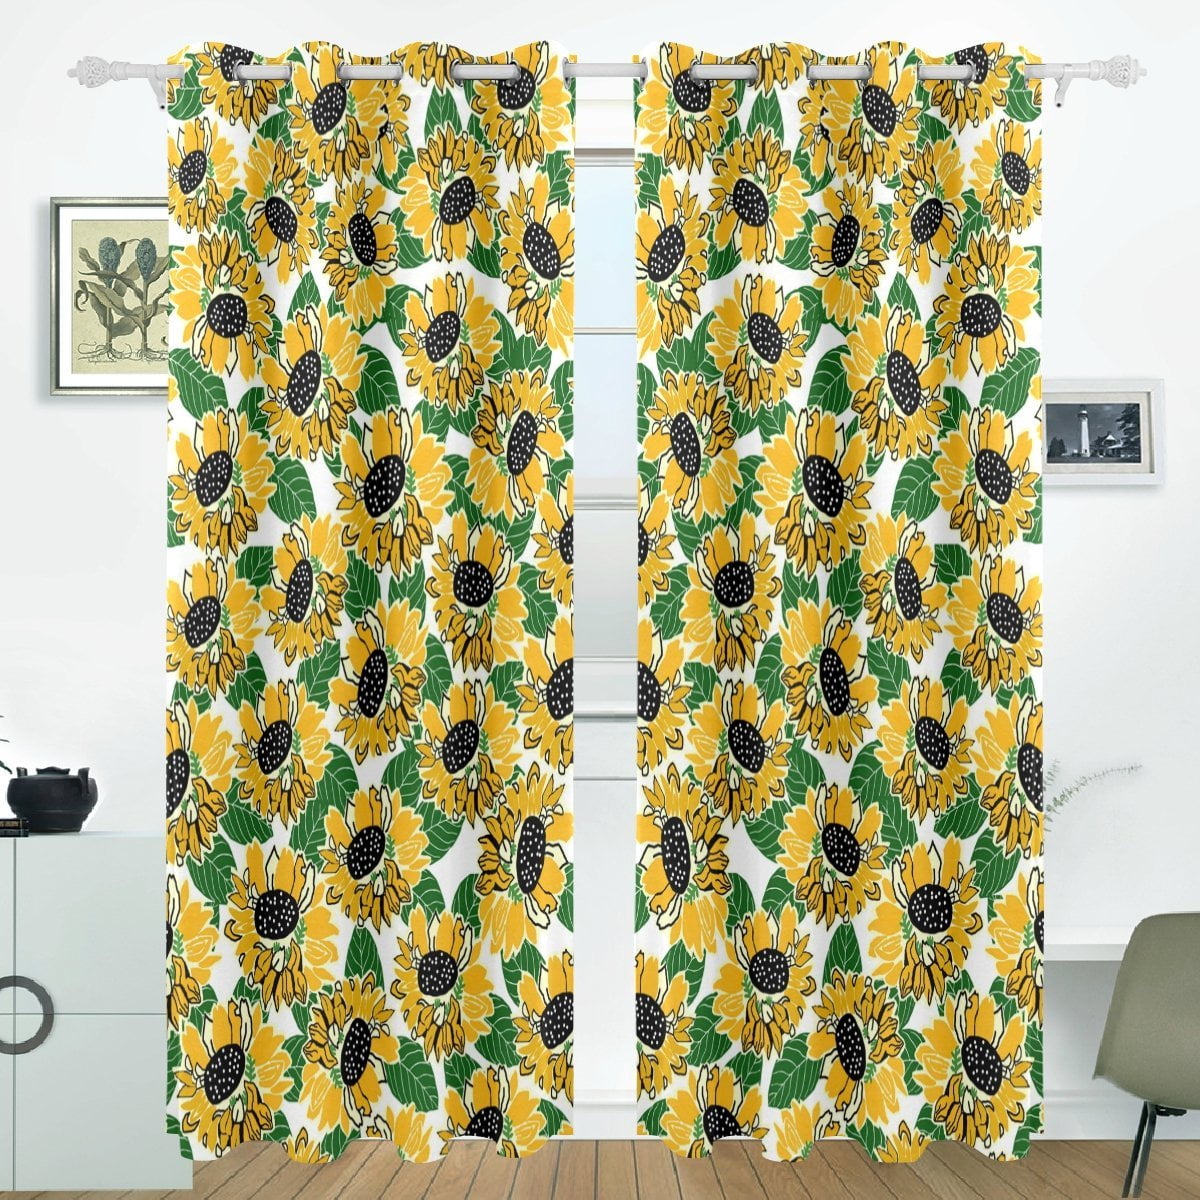 WINOMO Transparent Tulle Window Sheer Window Screen Rod Pocket Voile Curtains with Sunflowers Pattern for Bedroom Living Room 200x270cm Yellow 